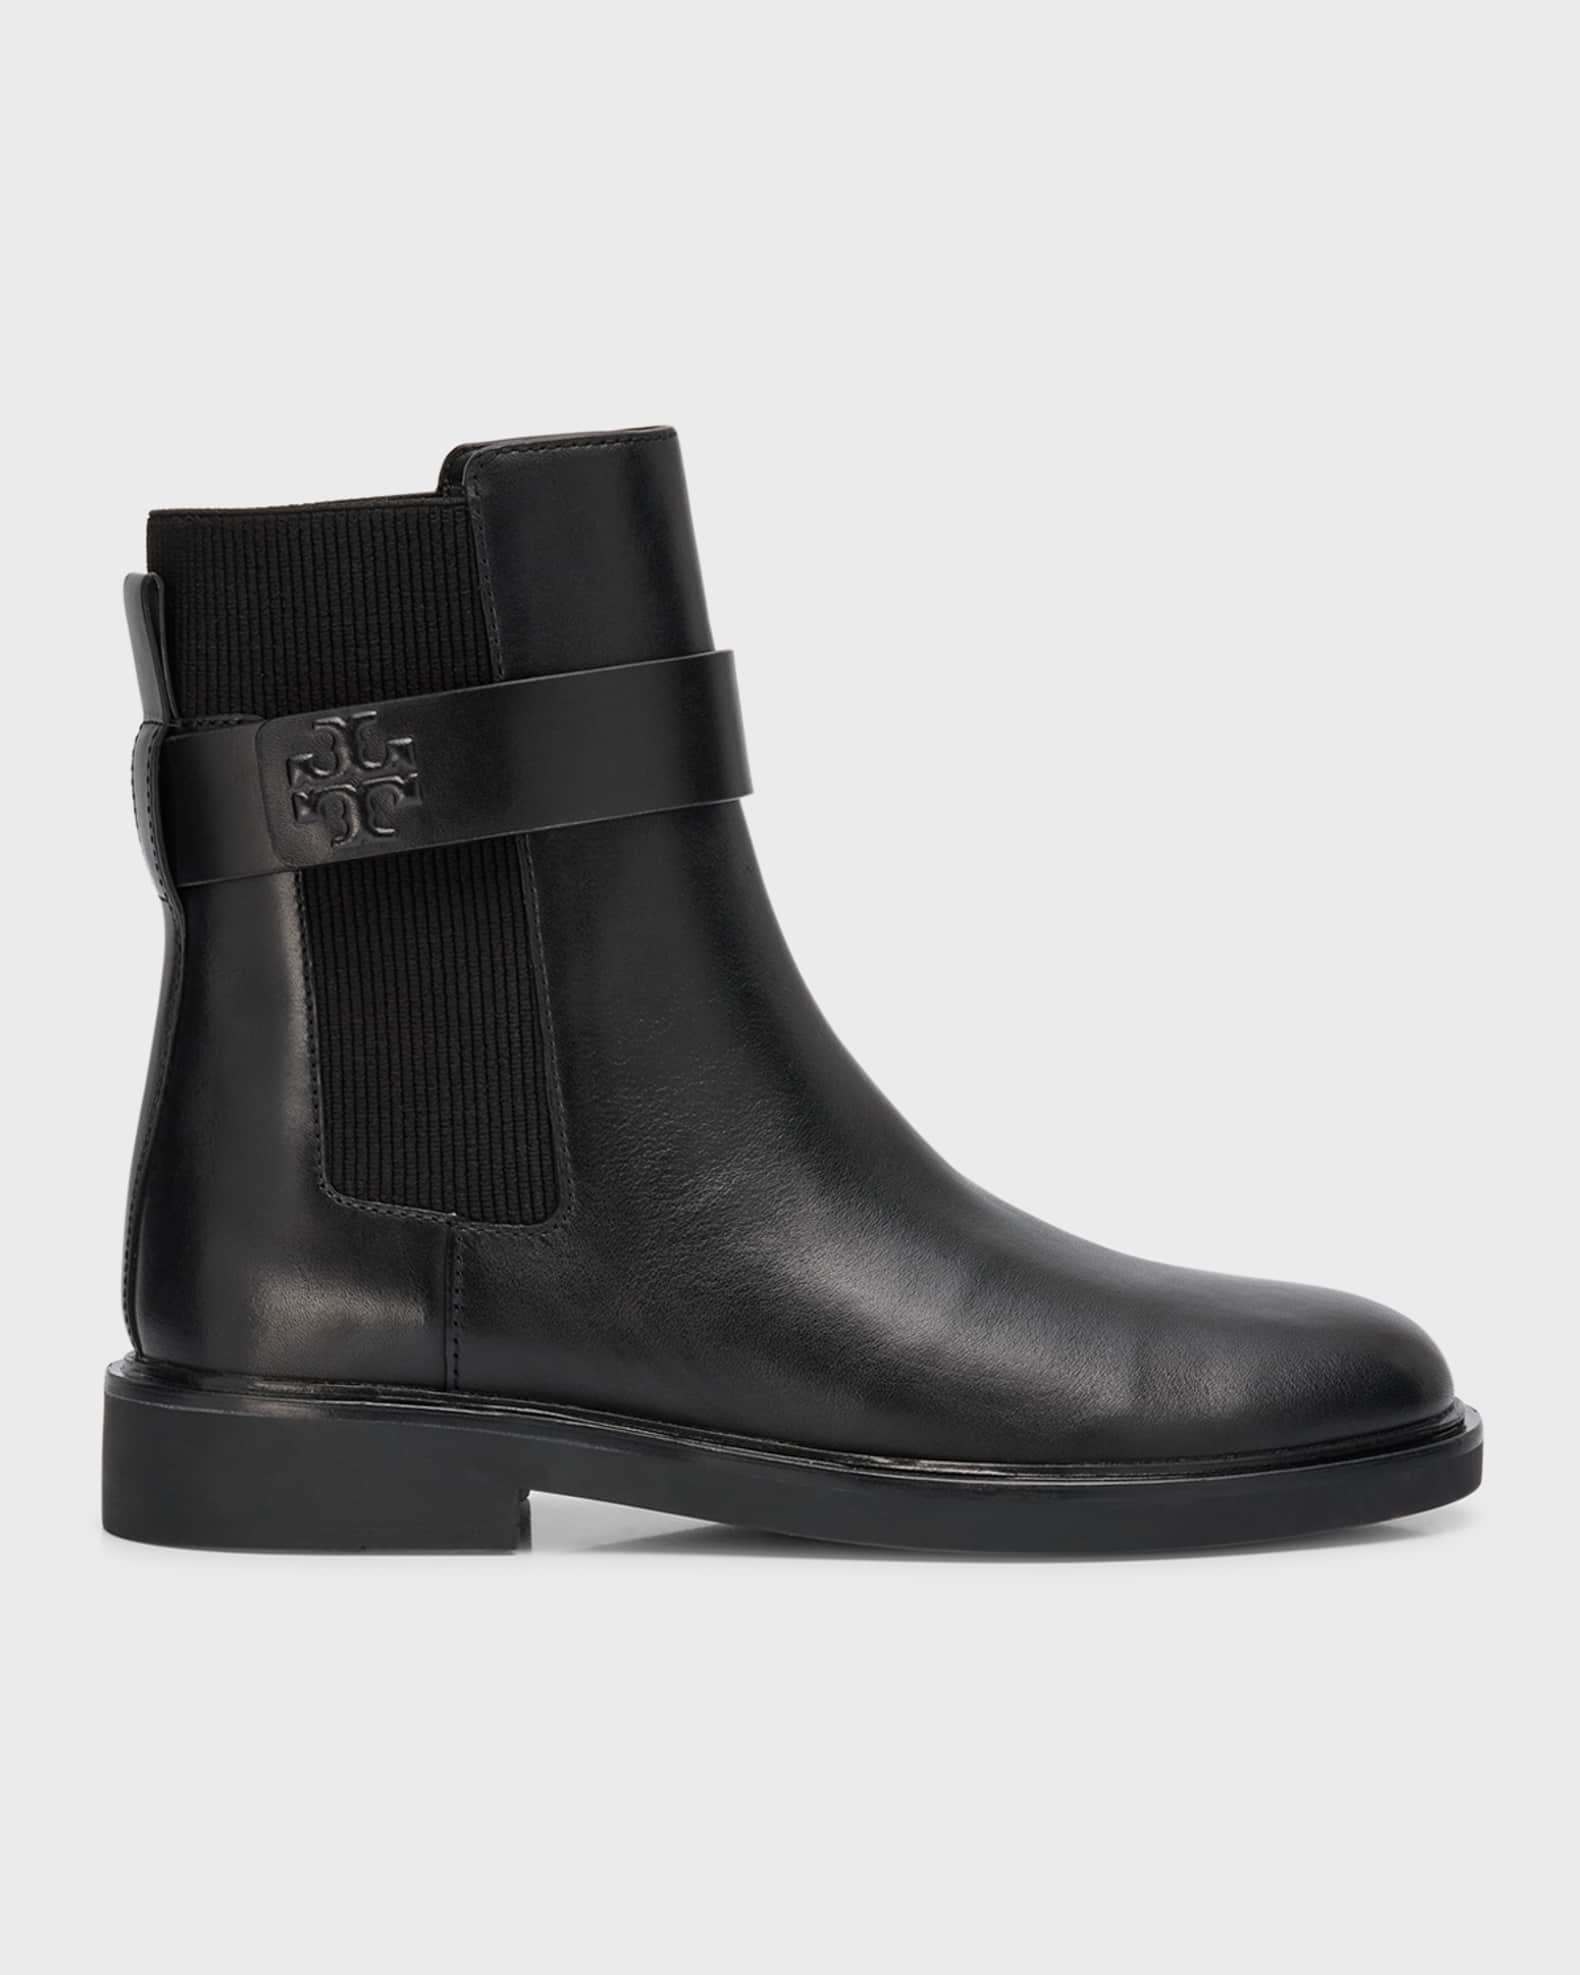 Tory Burch Leather Double T Chelsea Ankle Boots | Neiman Marcus